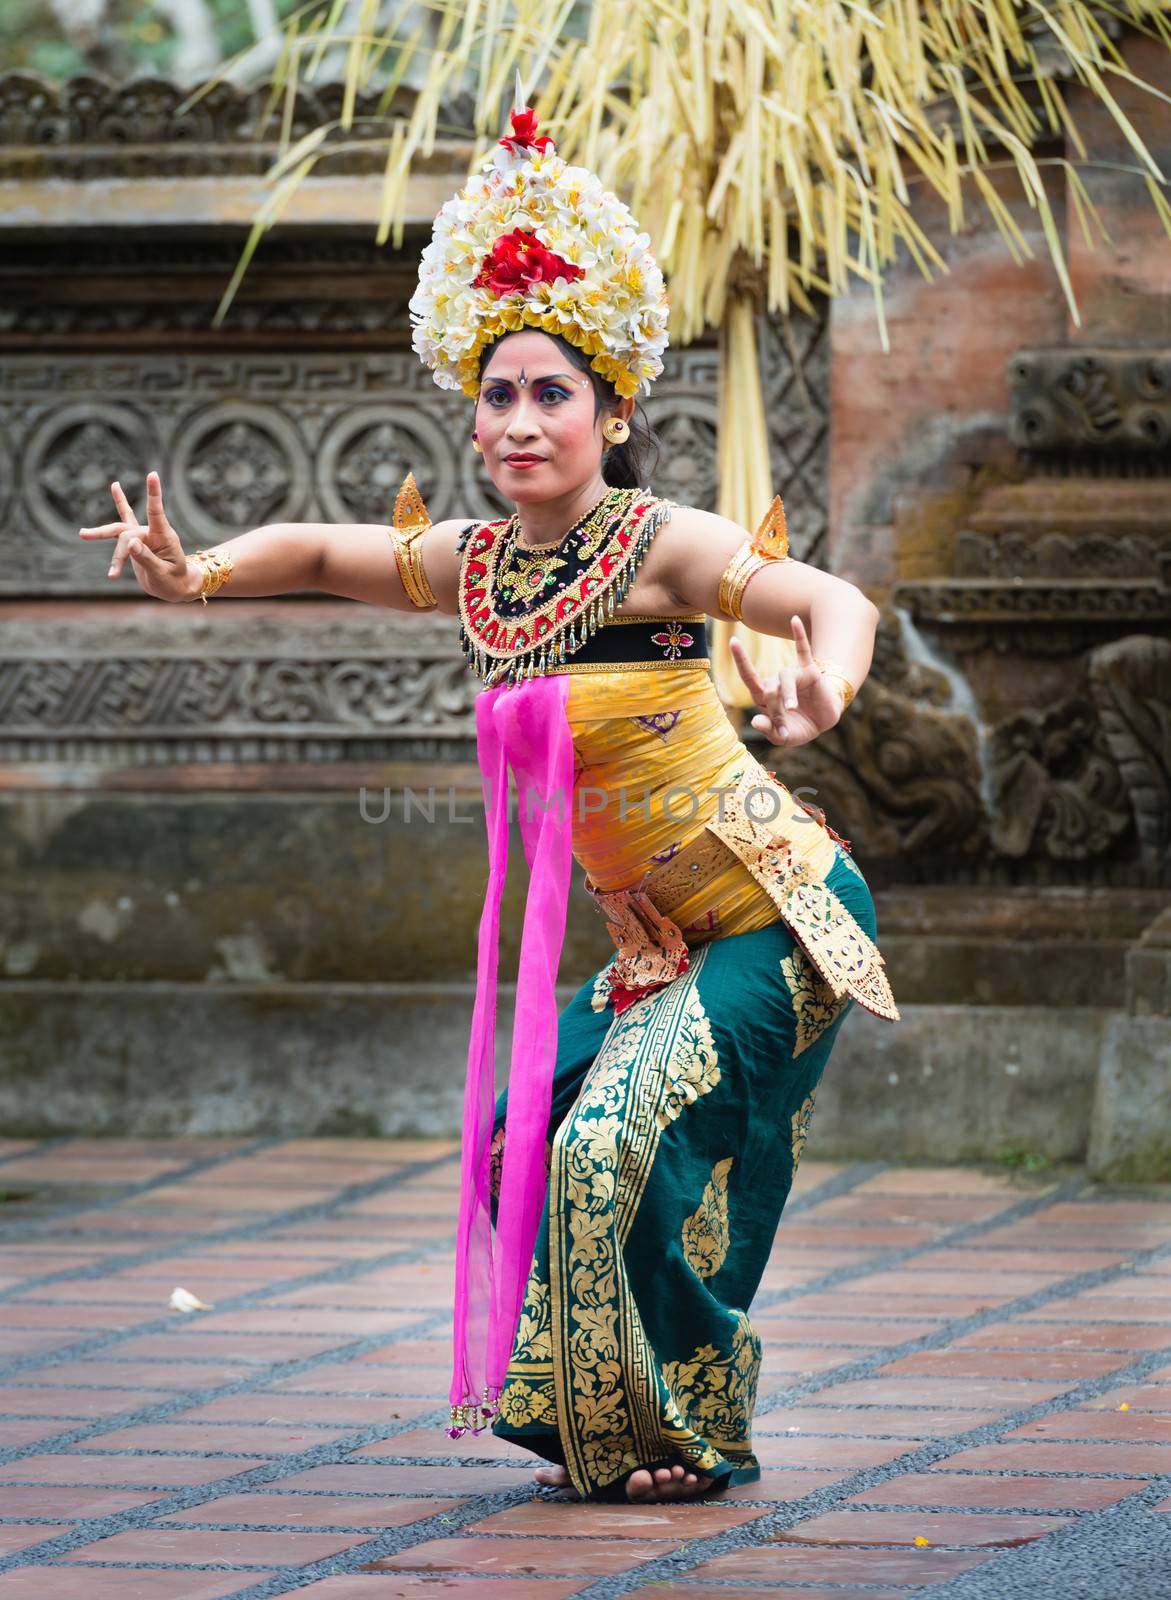 UBUD, BALI, INDONESIA - SEP 21: Unidentified woman performs Legong dance, the traditionala form of Balinese dance on Sep 21, 2012 in Ubud, Bali, Indonesia. Legong is popular tourist attraction on Bali